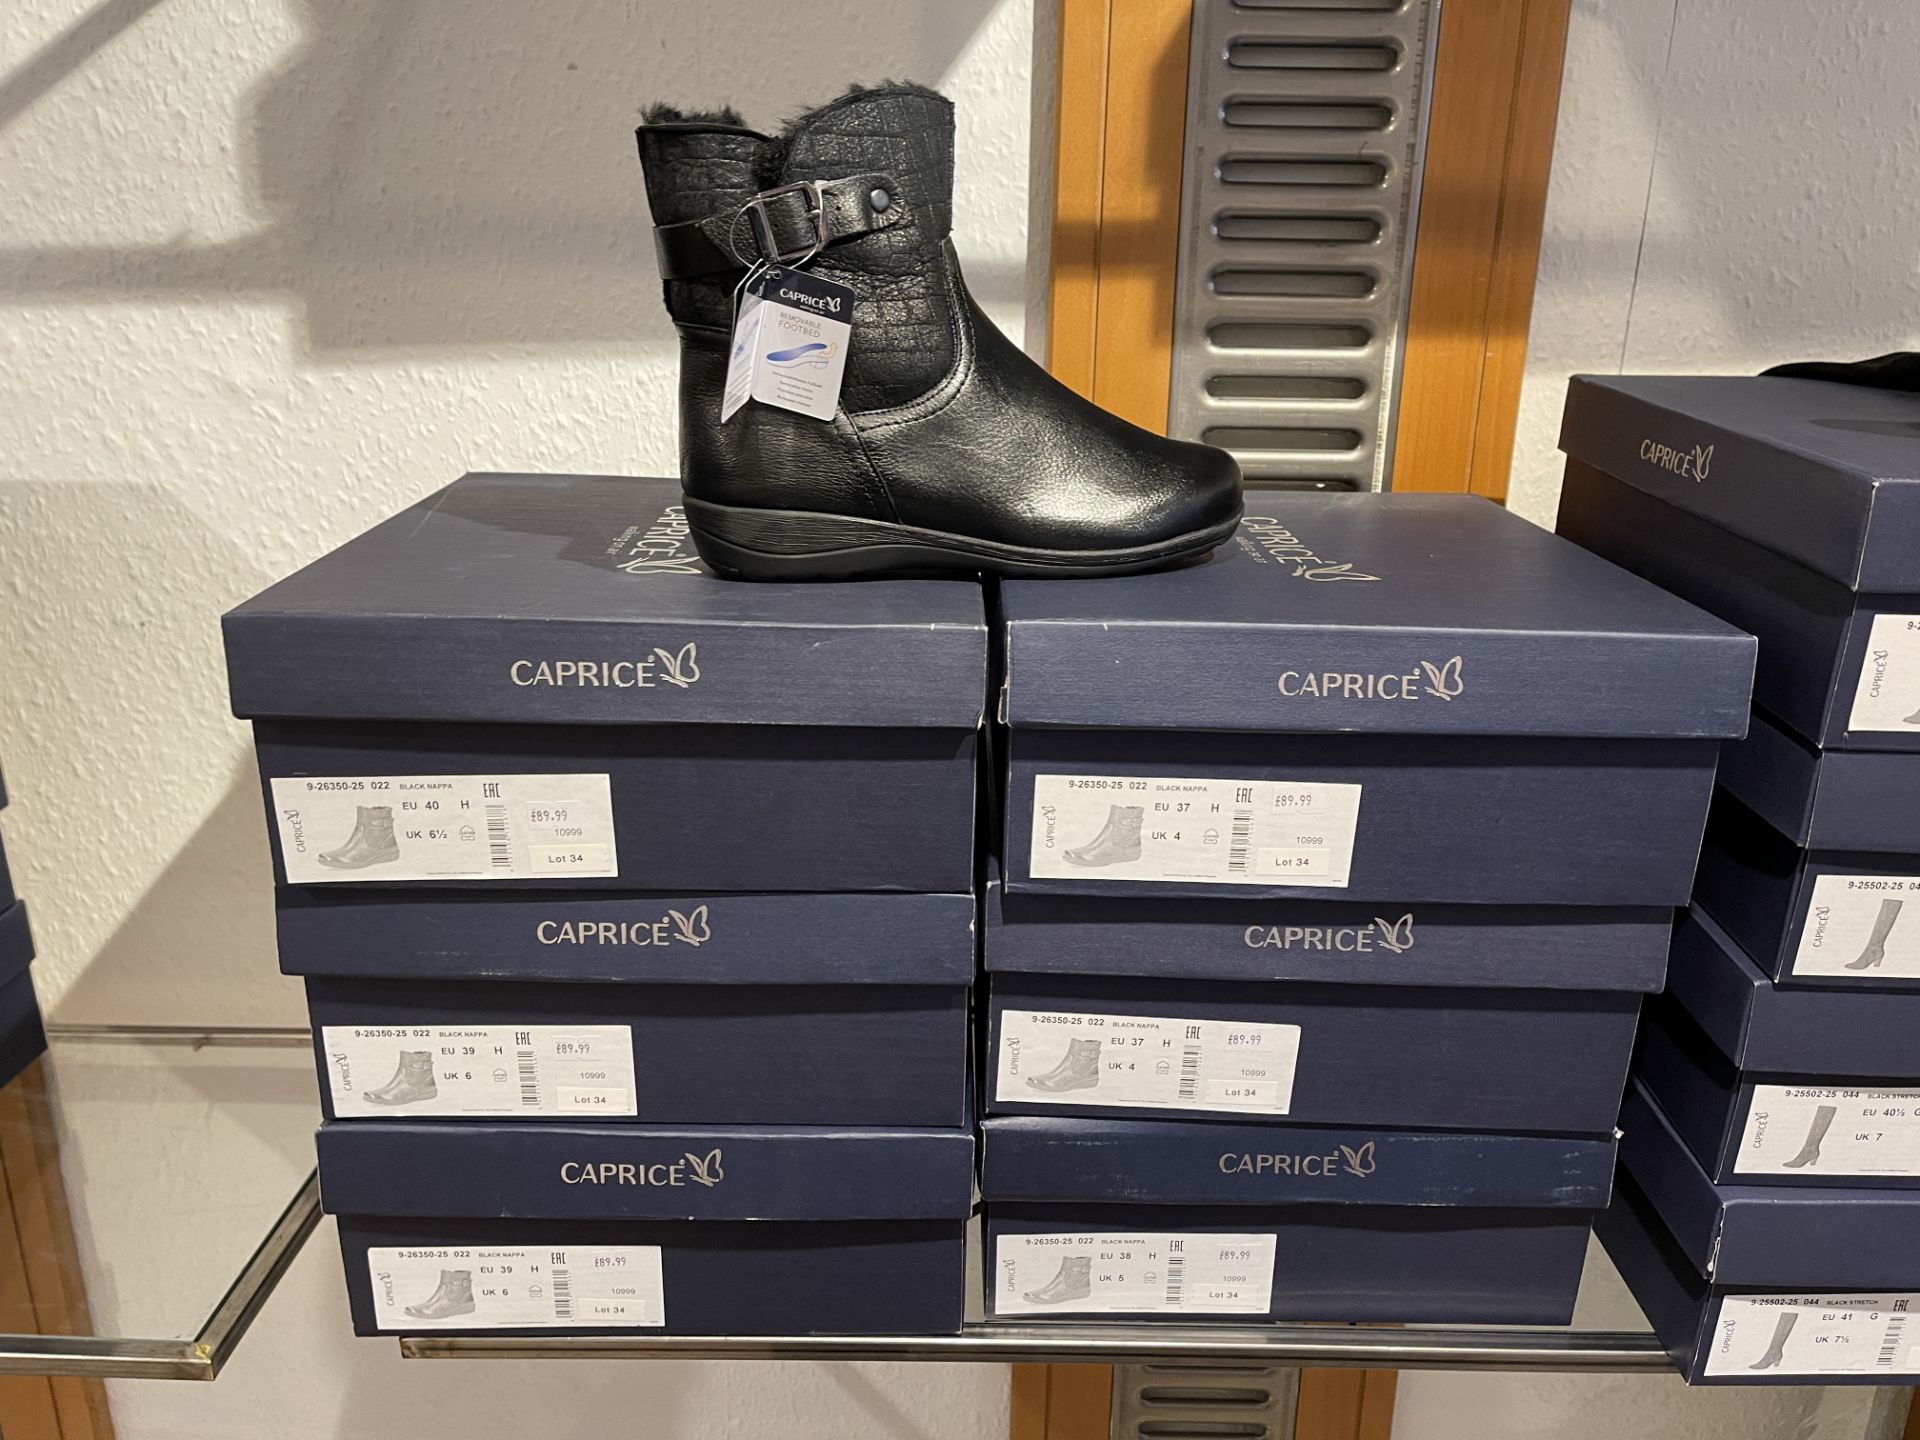 Caprice 4 Pairs: Black Stretch Boots 9-25502-25 044. Sizes 3.5 - 7.5 (RRP £59) Caprice 6 Pairs: - Image 13 of 19